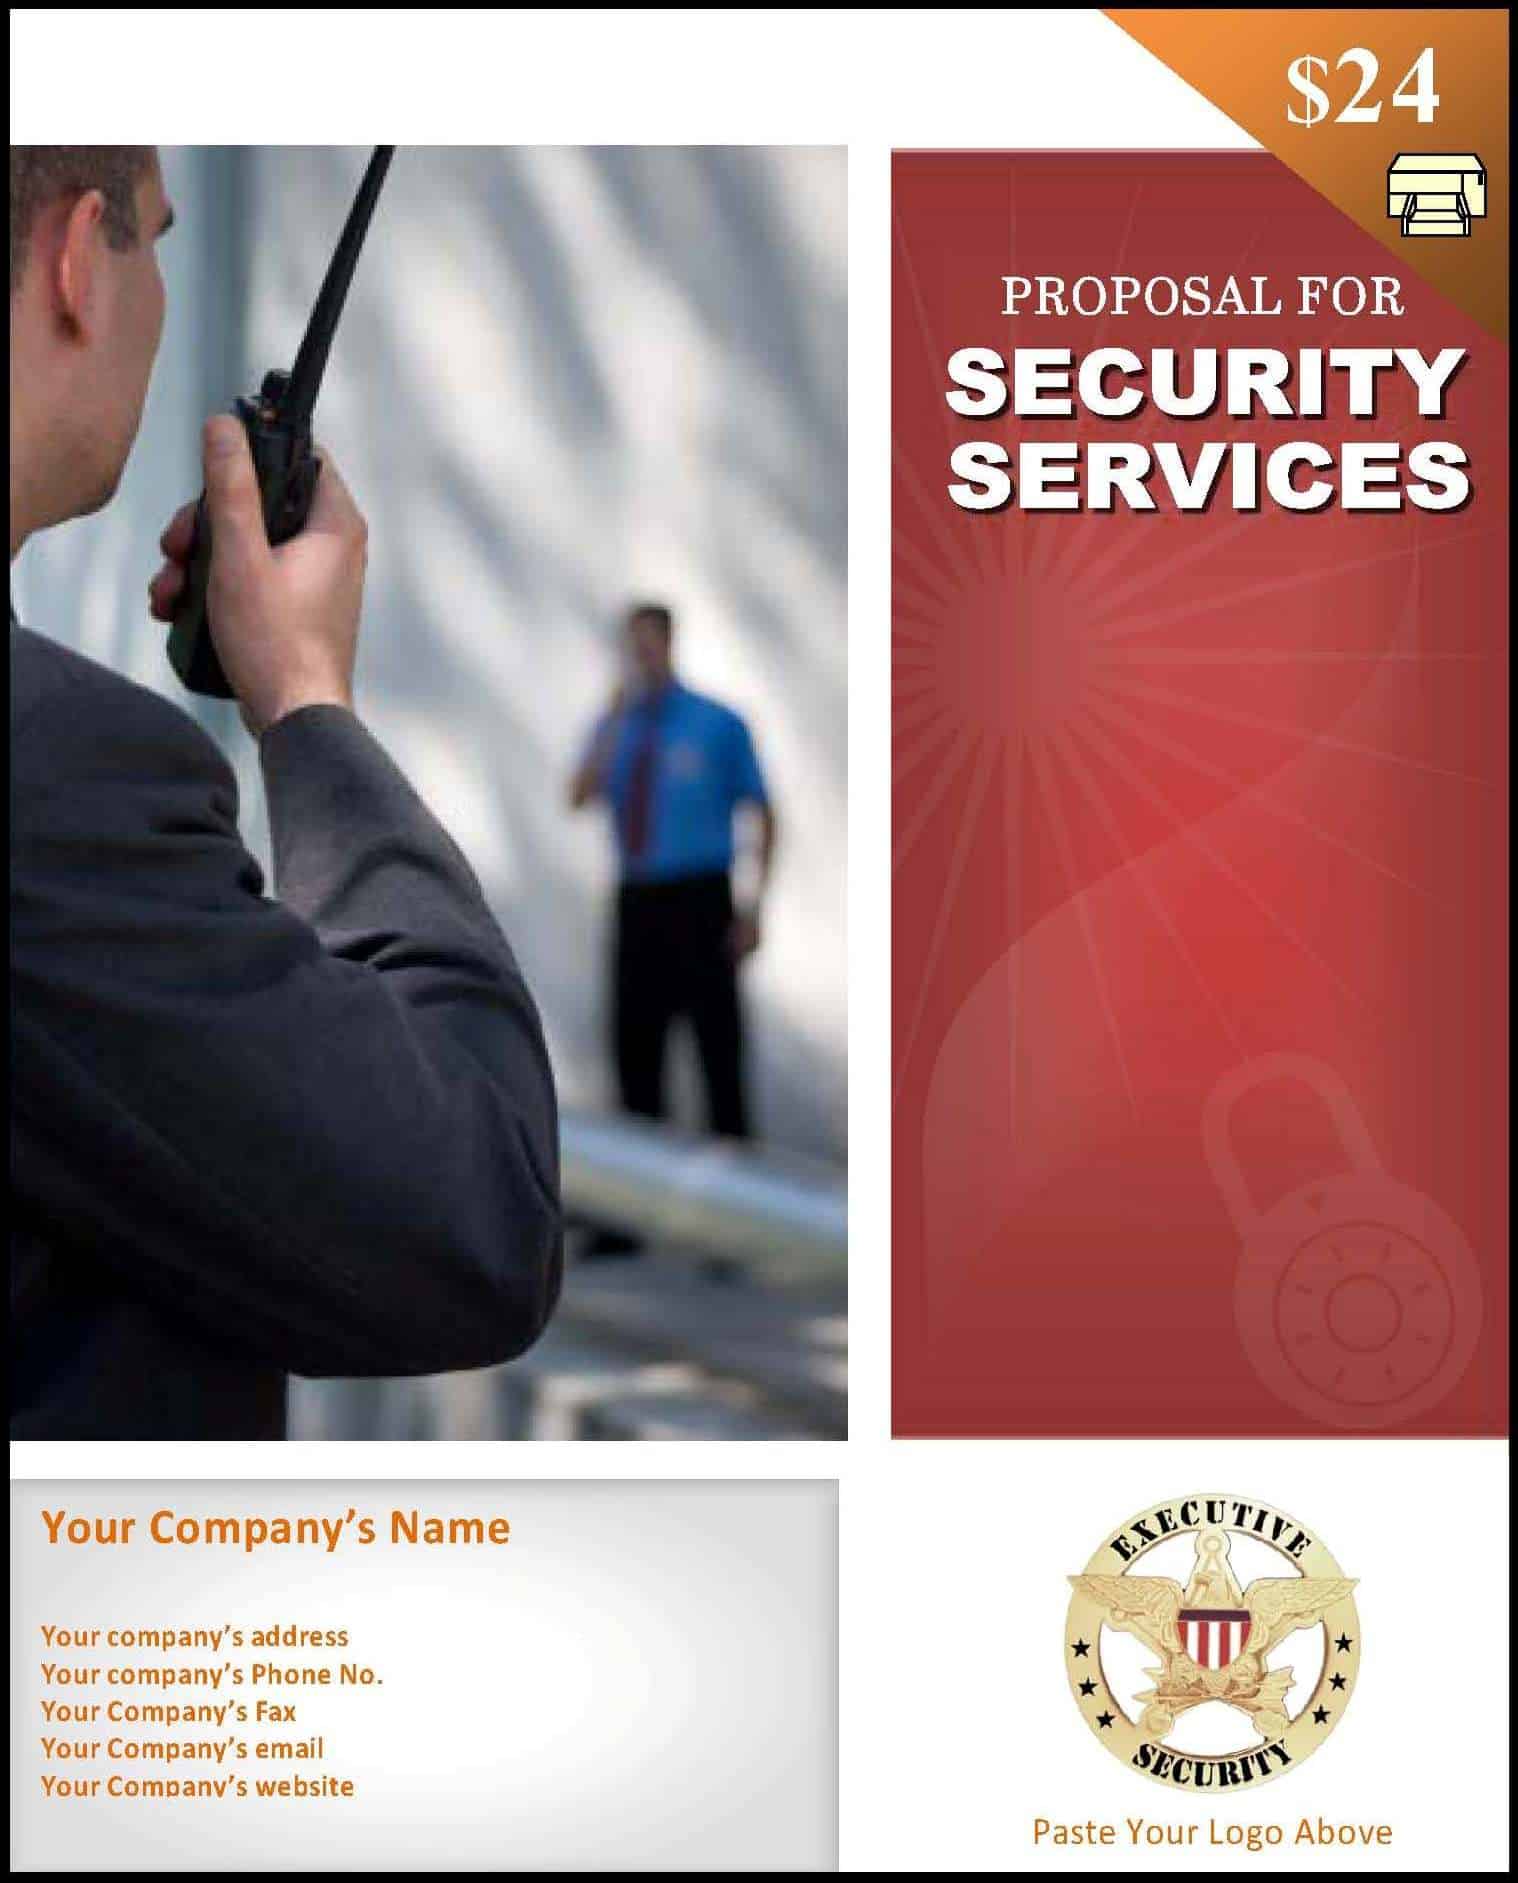 Proposal For Security Services startasecuritycompany com